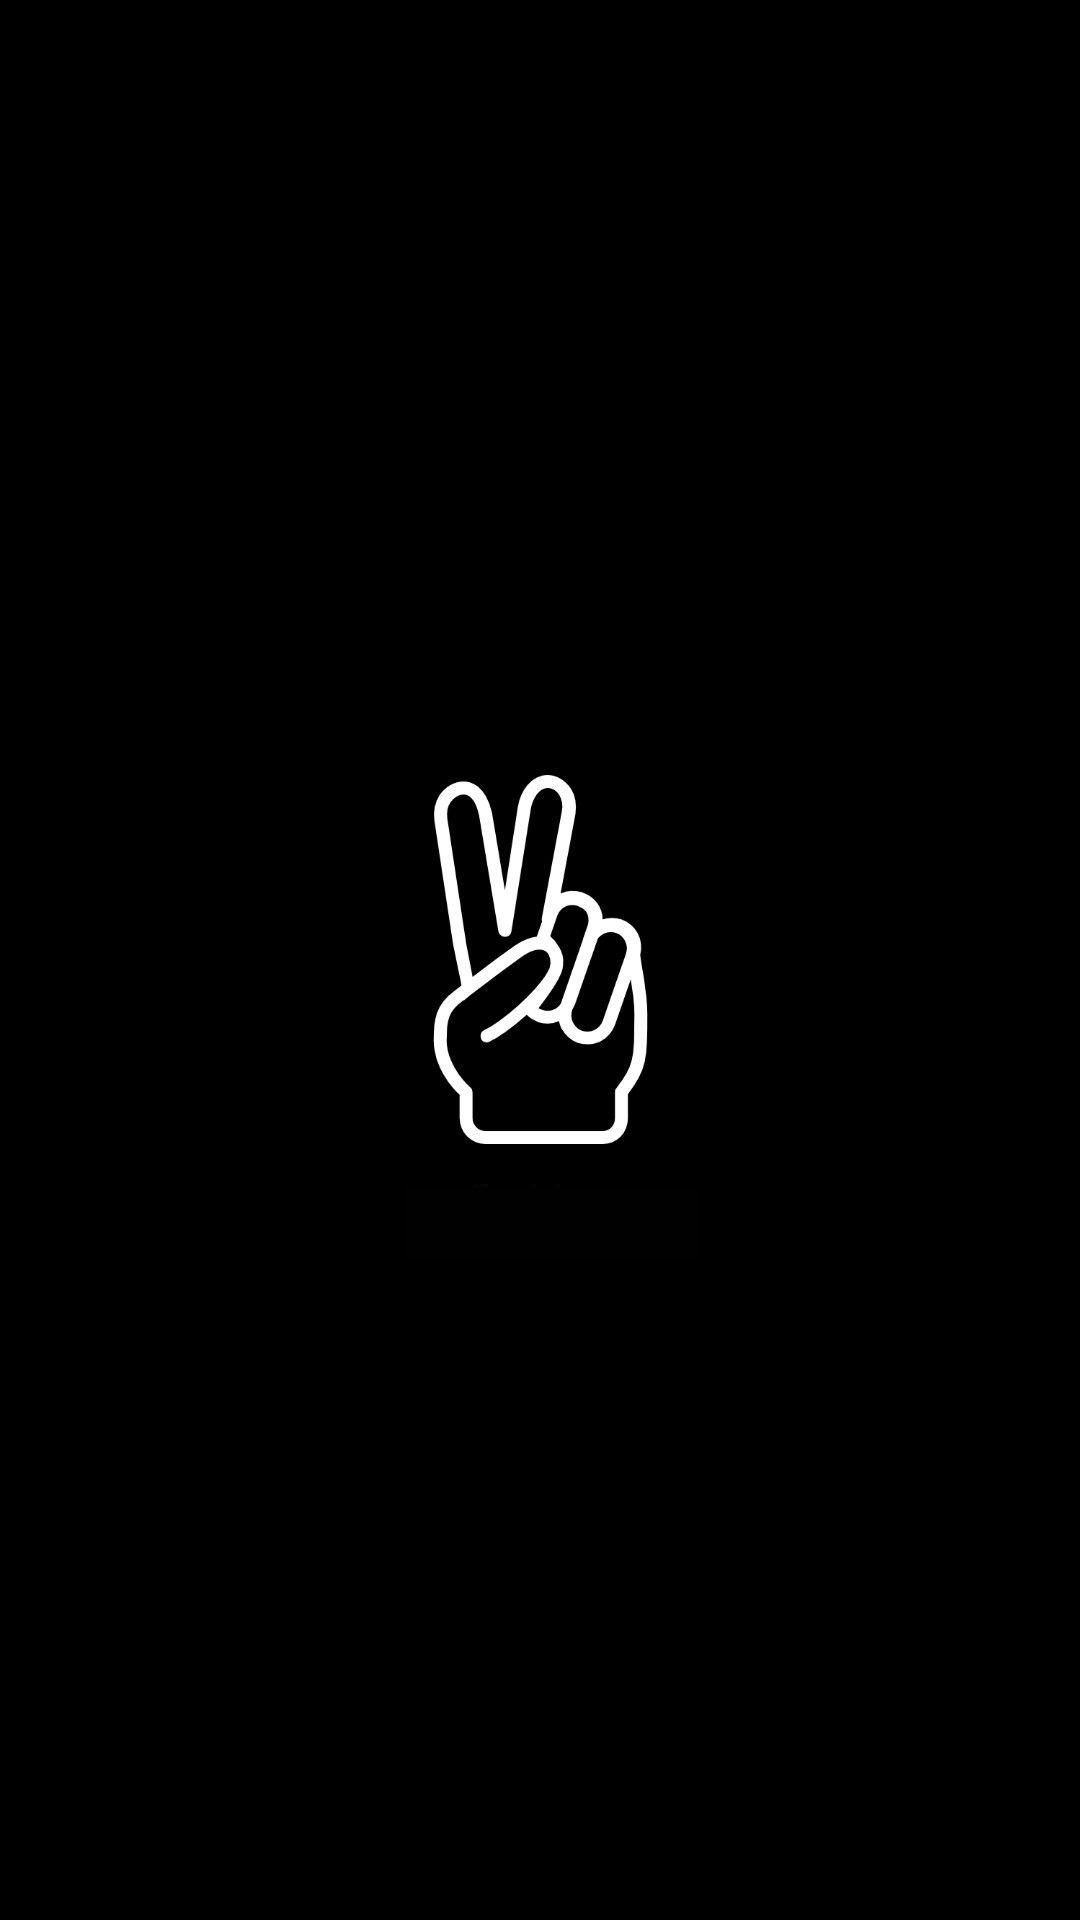 Peace sign, Instagram theme, Highlight icons, Black and white, 1080x1920 Full HD Handy